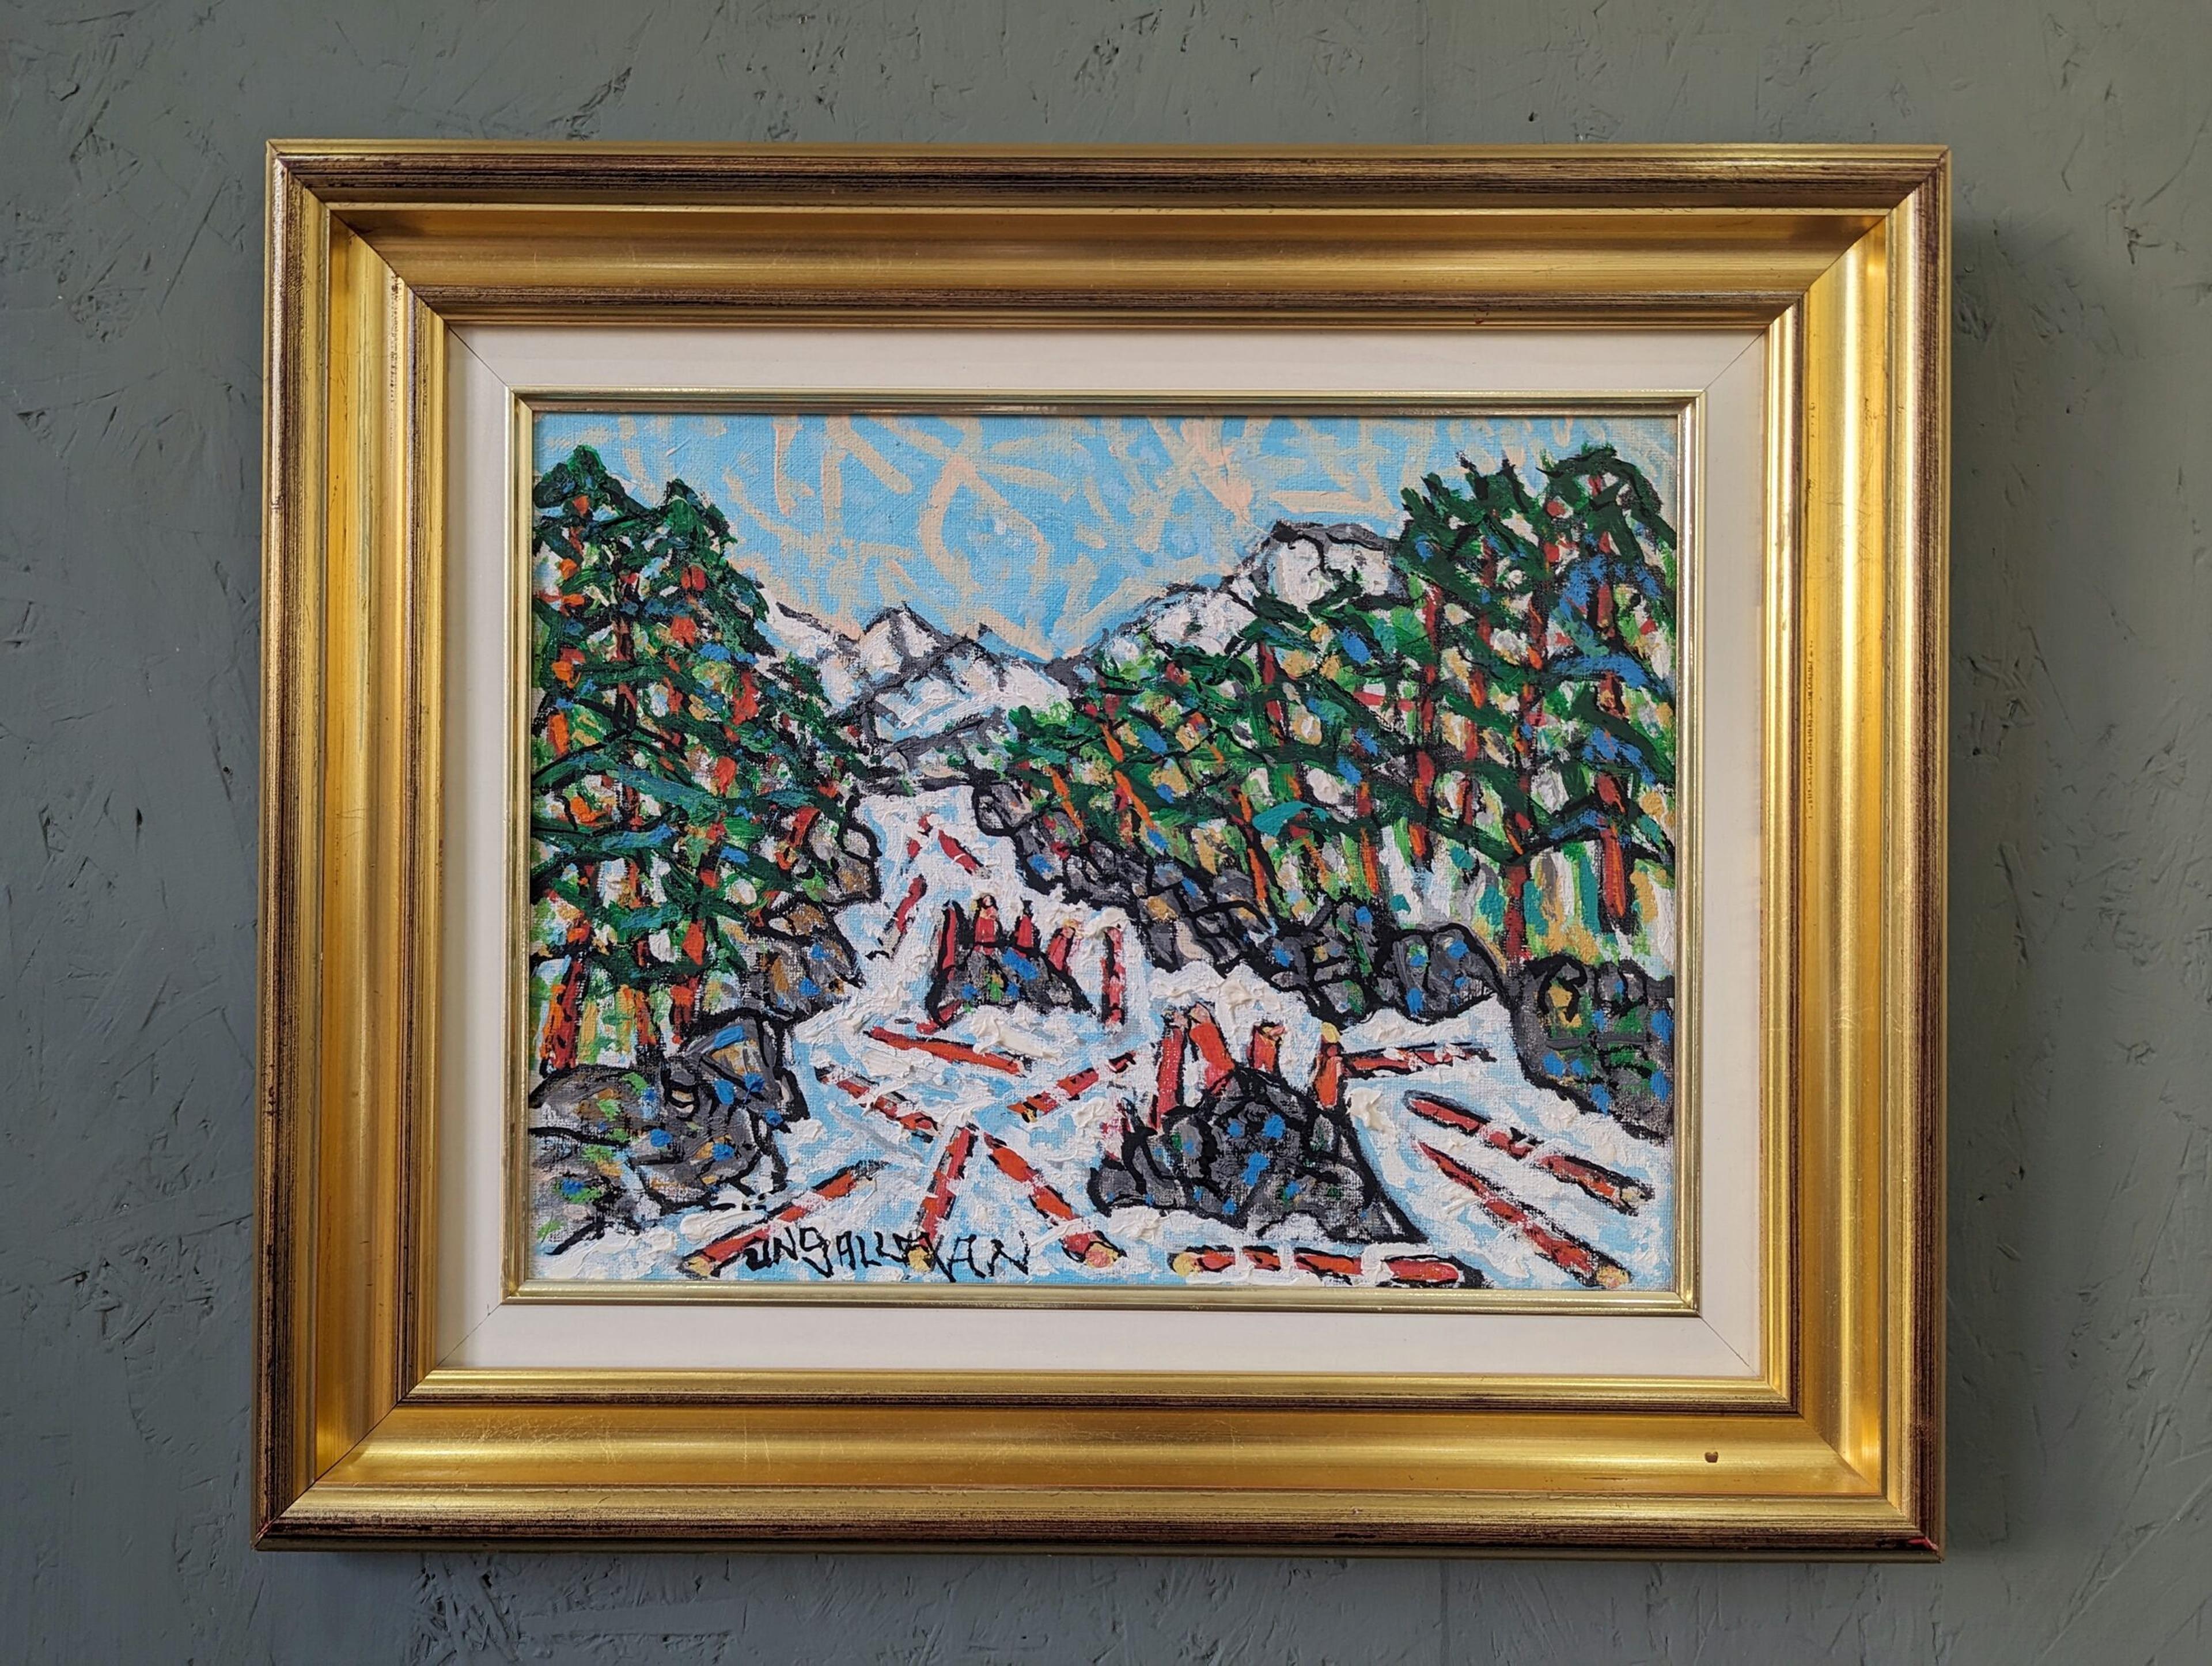 LIVELY WINTER
Size: 41.5 x 49.5 cm (including frame)
Oil on Canvas

A lively and expressive winter landscape composition, executed in oil onto canvas by Swedish artist Uno Vallman (1913-2004), whose works are included in the Swedish National Museum